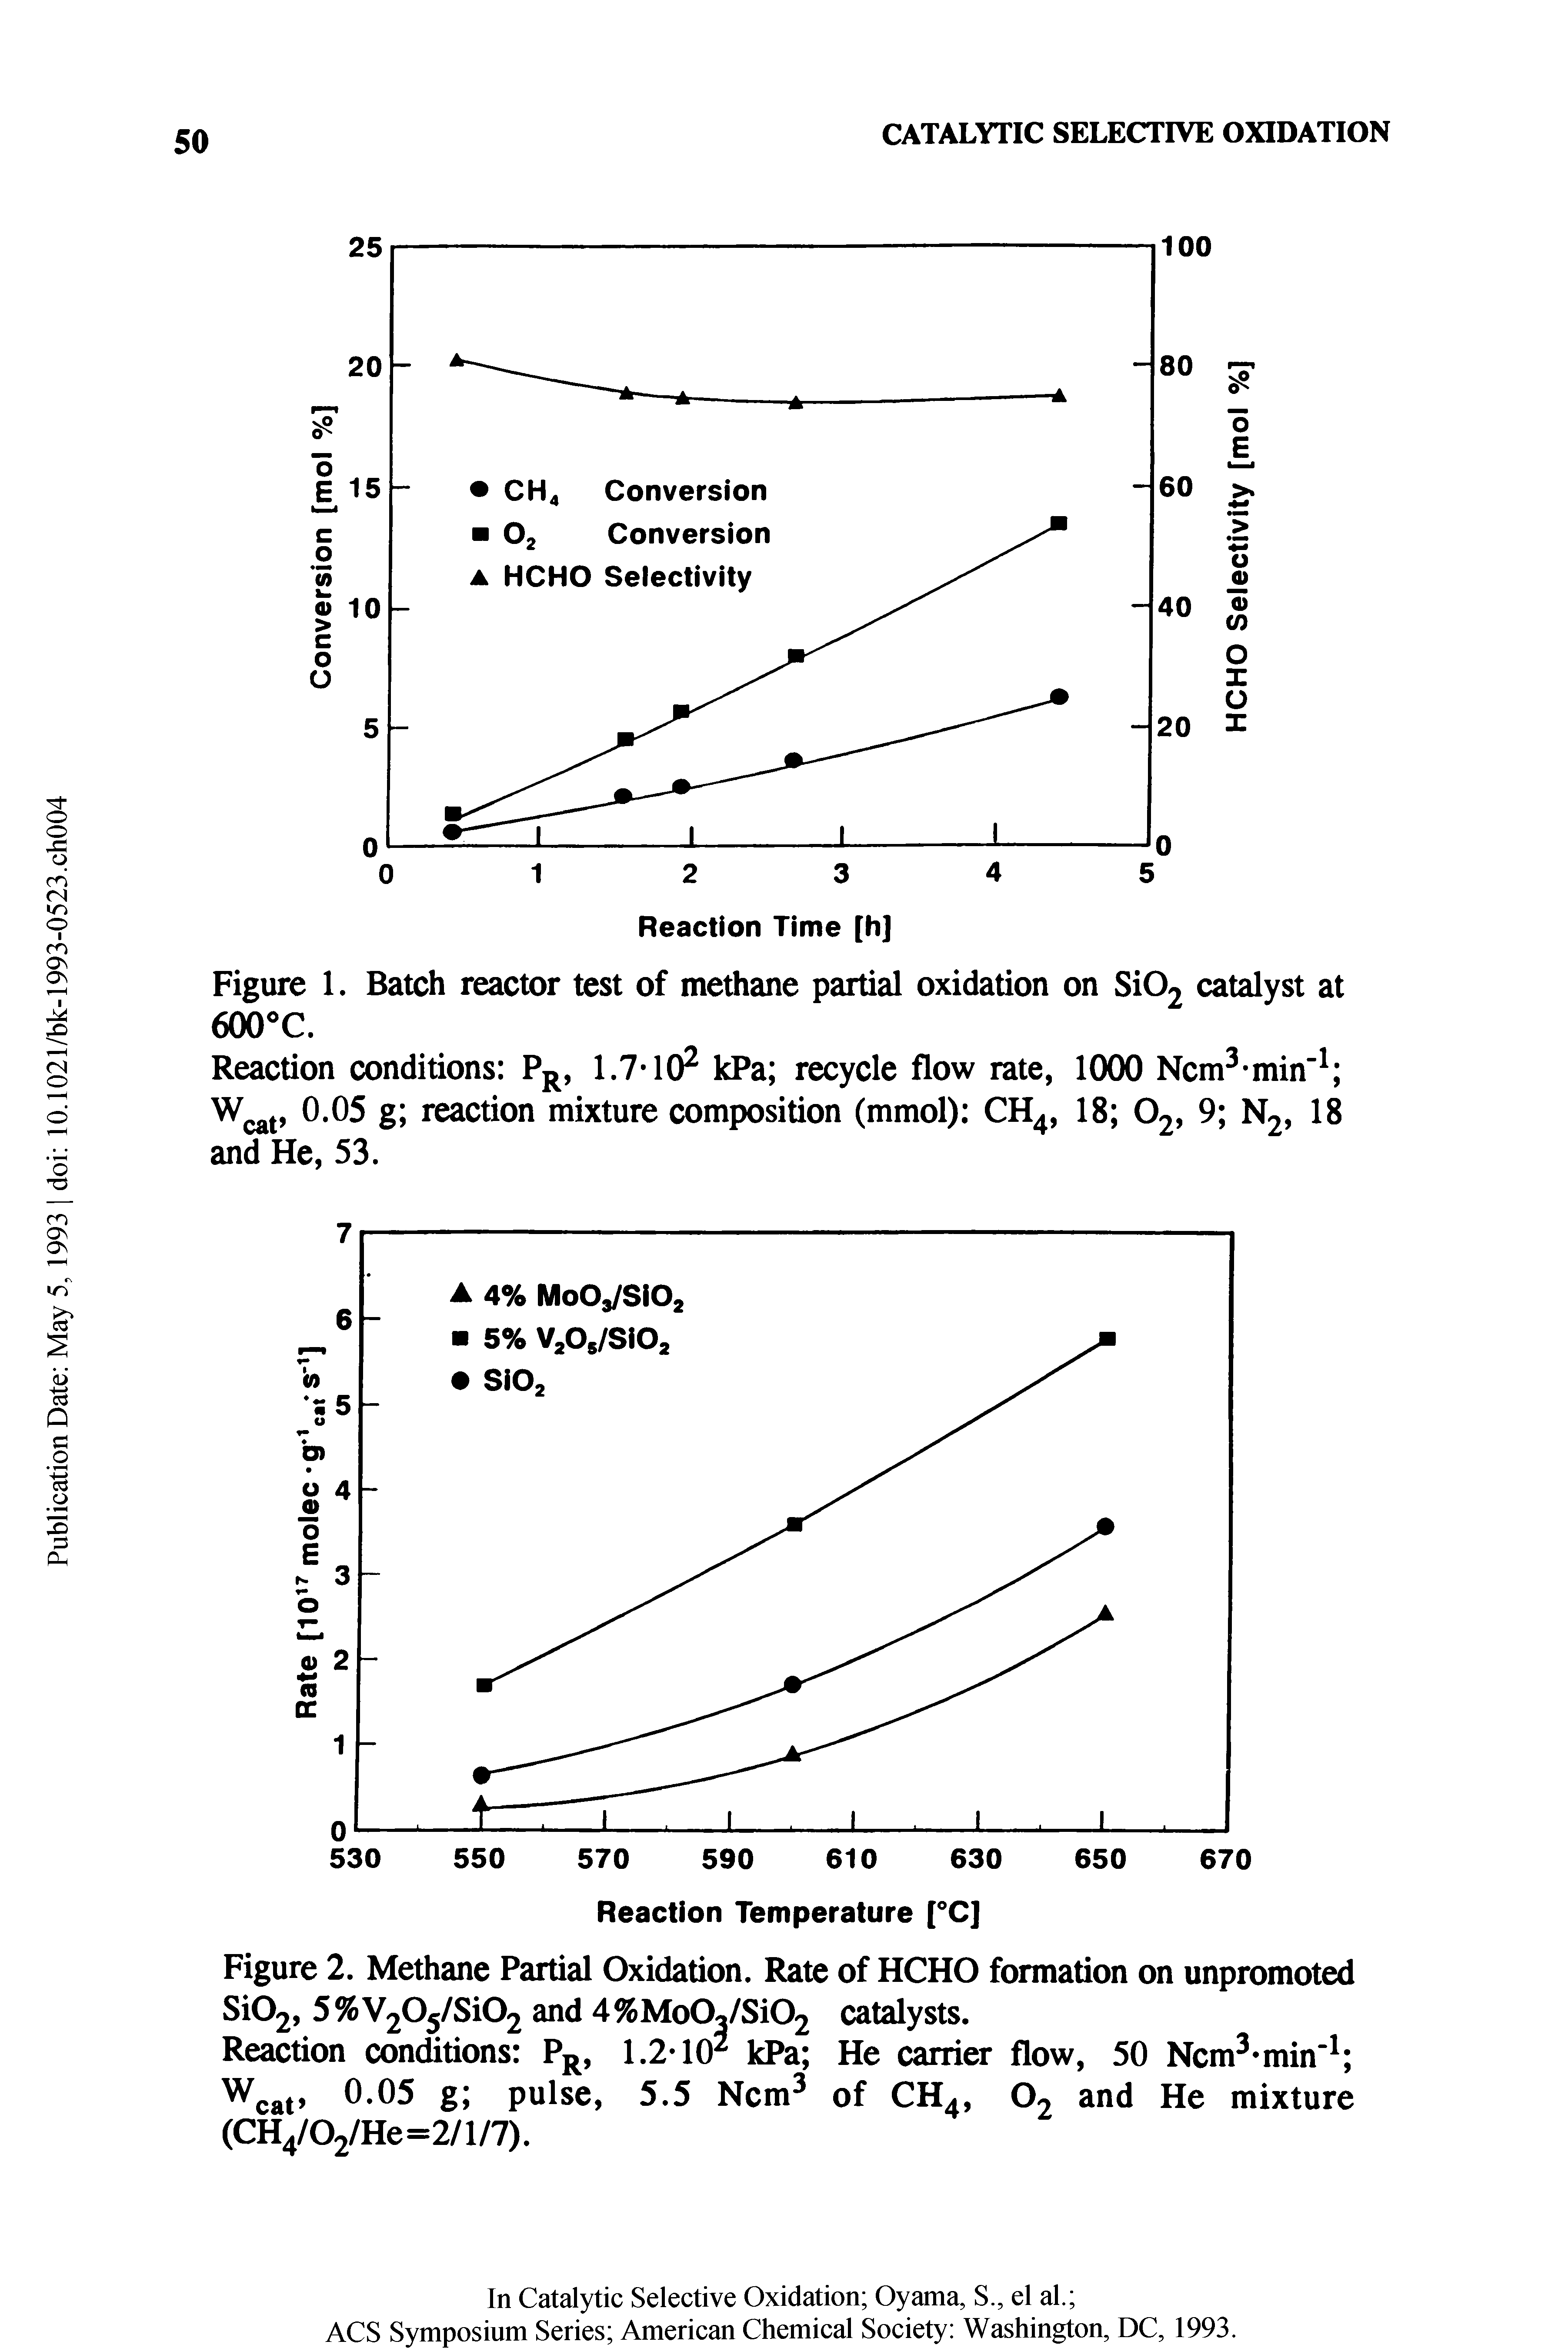 Figure 1. Batch reactor test of methane partial oxidation on Si02 catalyst at 600 C.